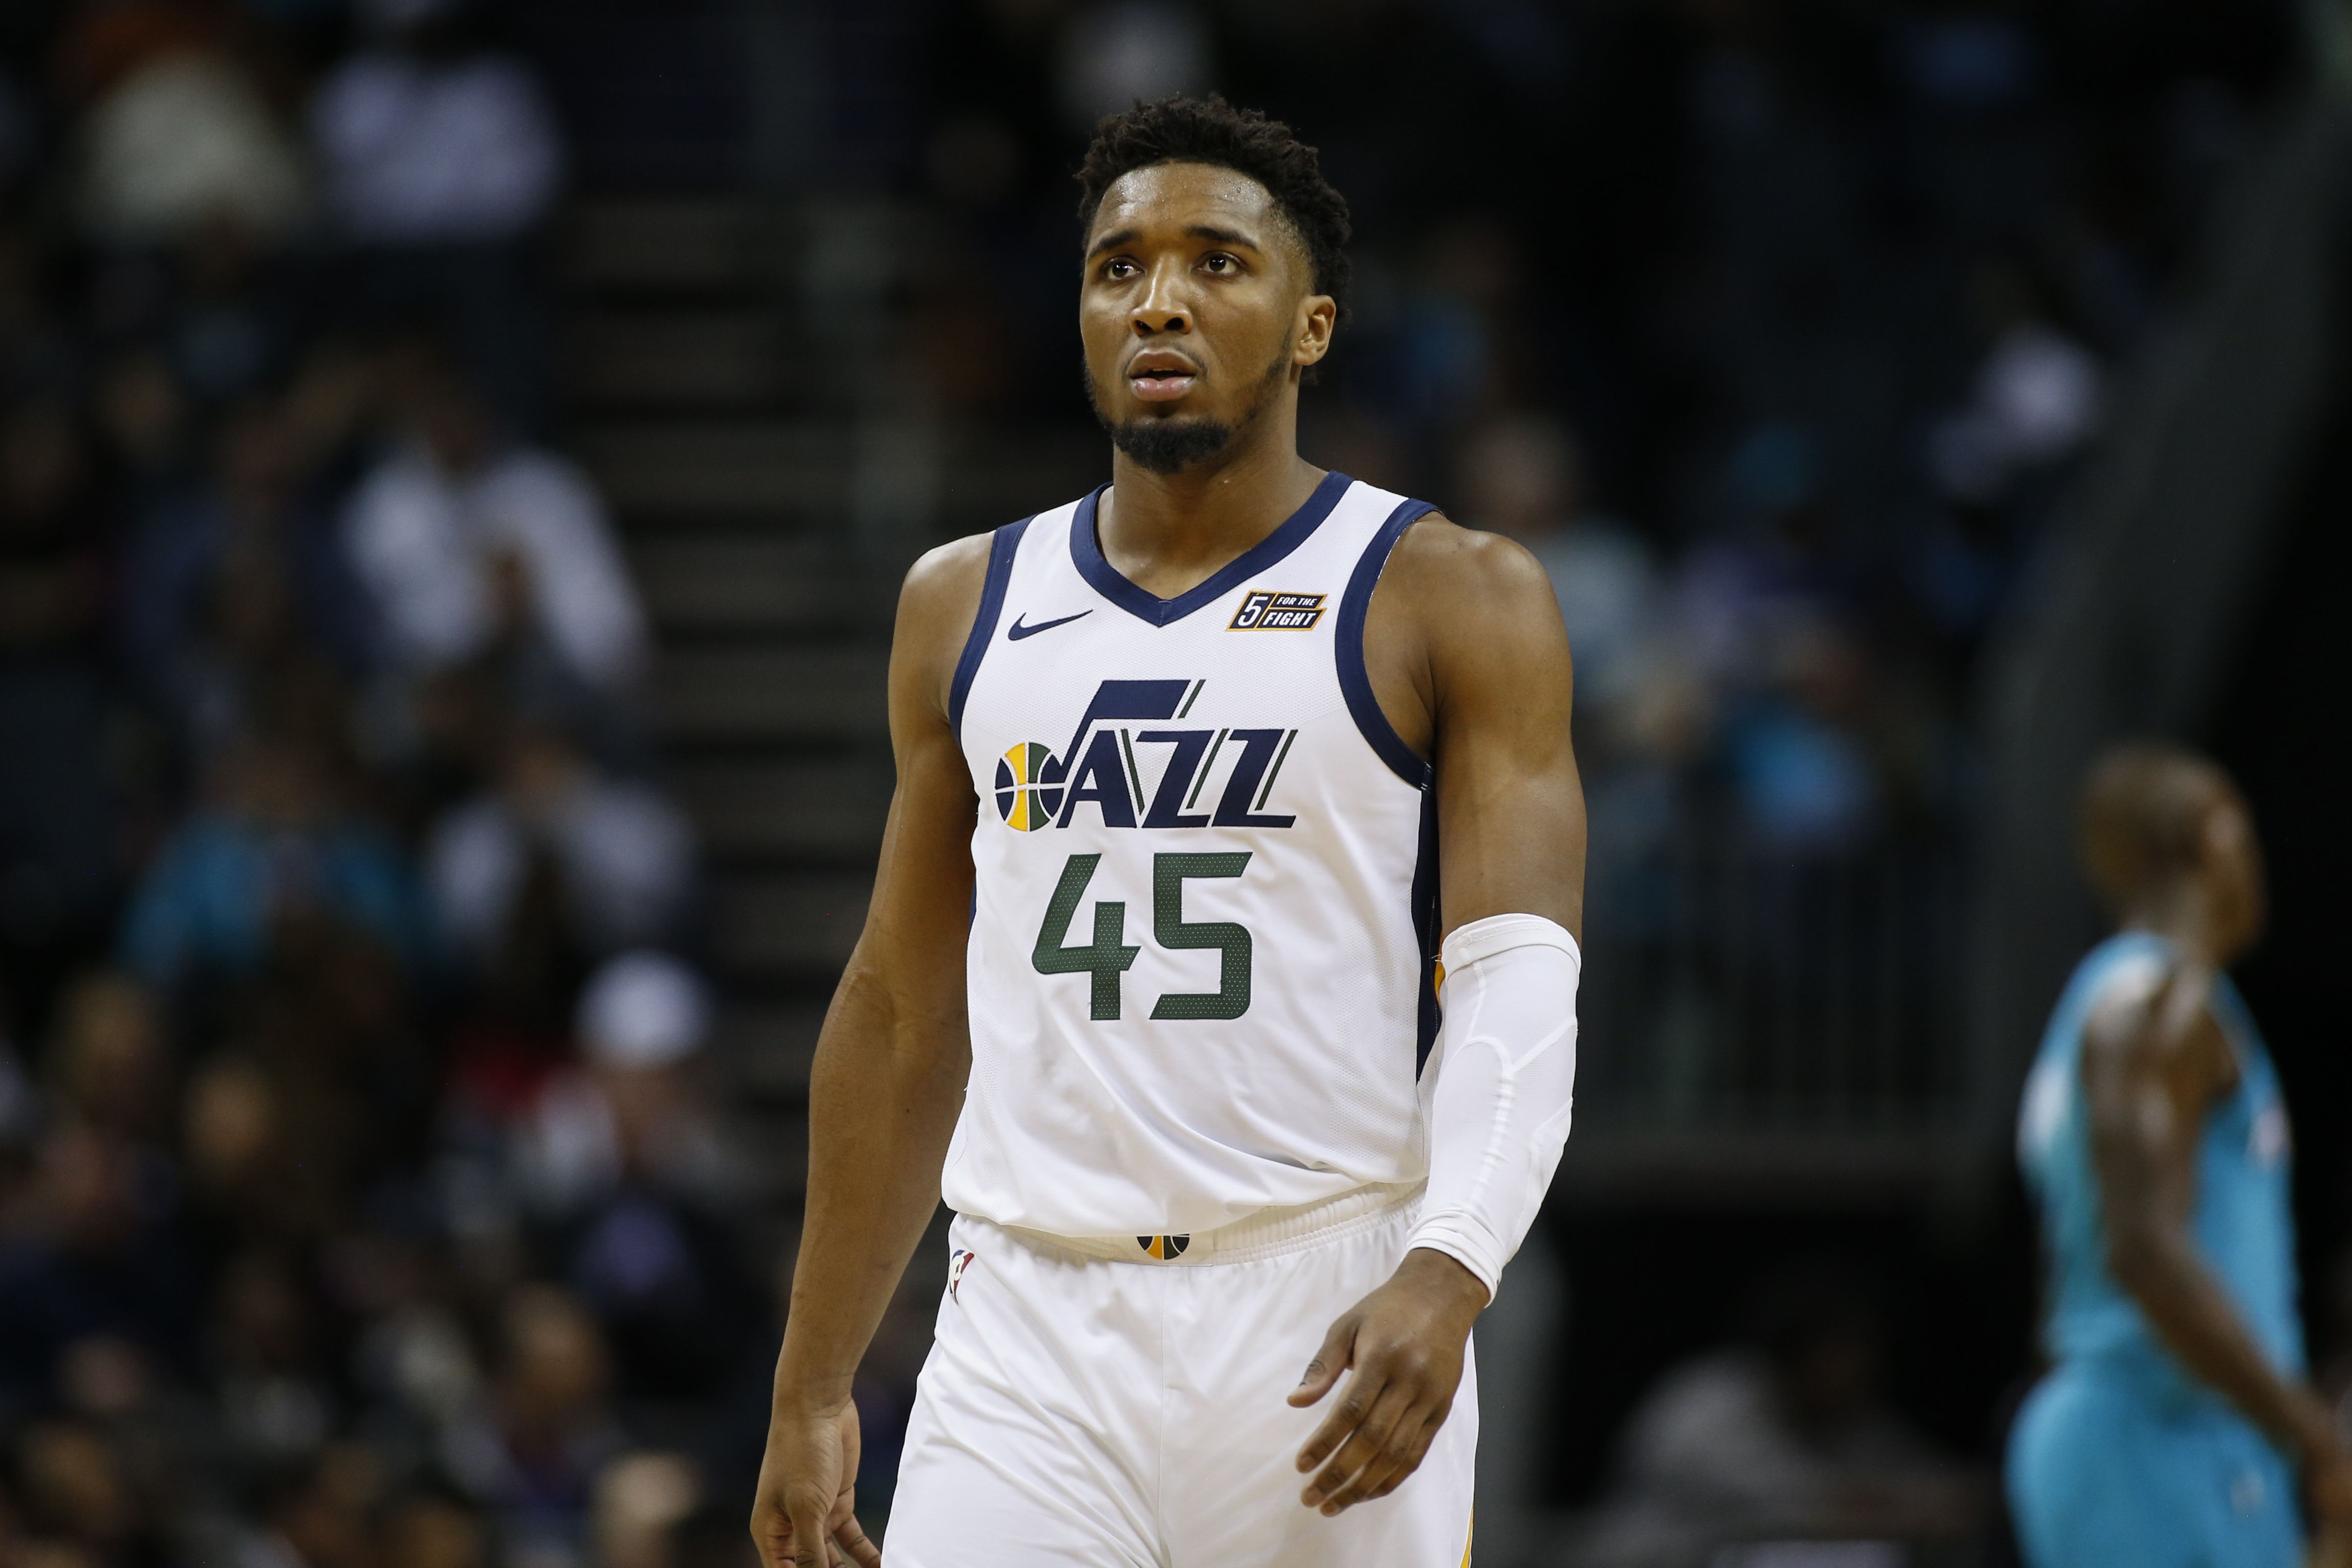 Report: Utah Jazz star Donovan Mitchell tests positive for